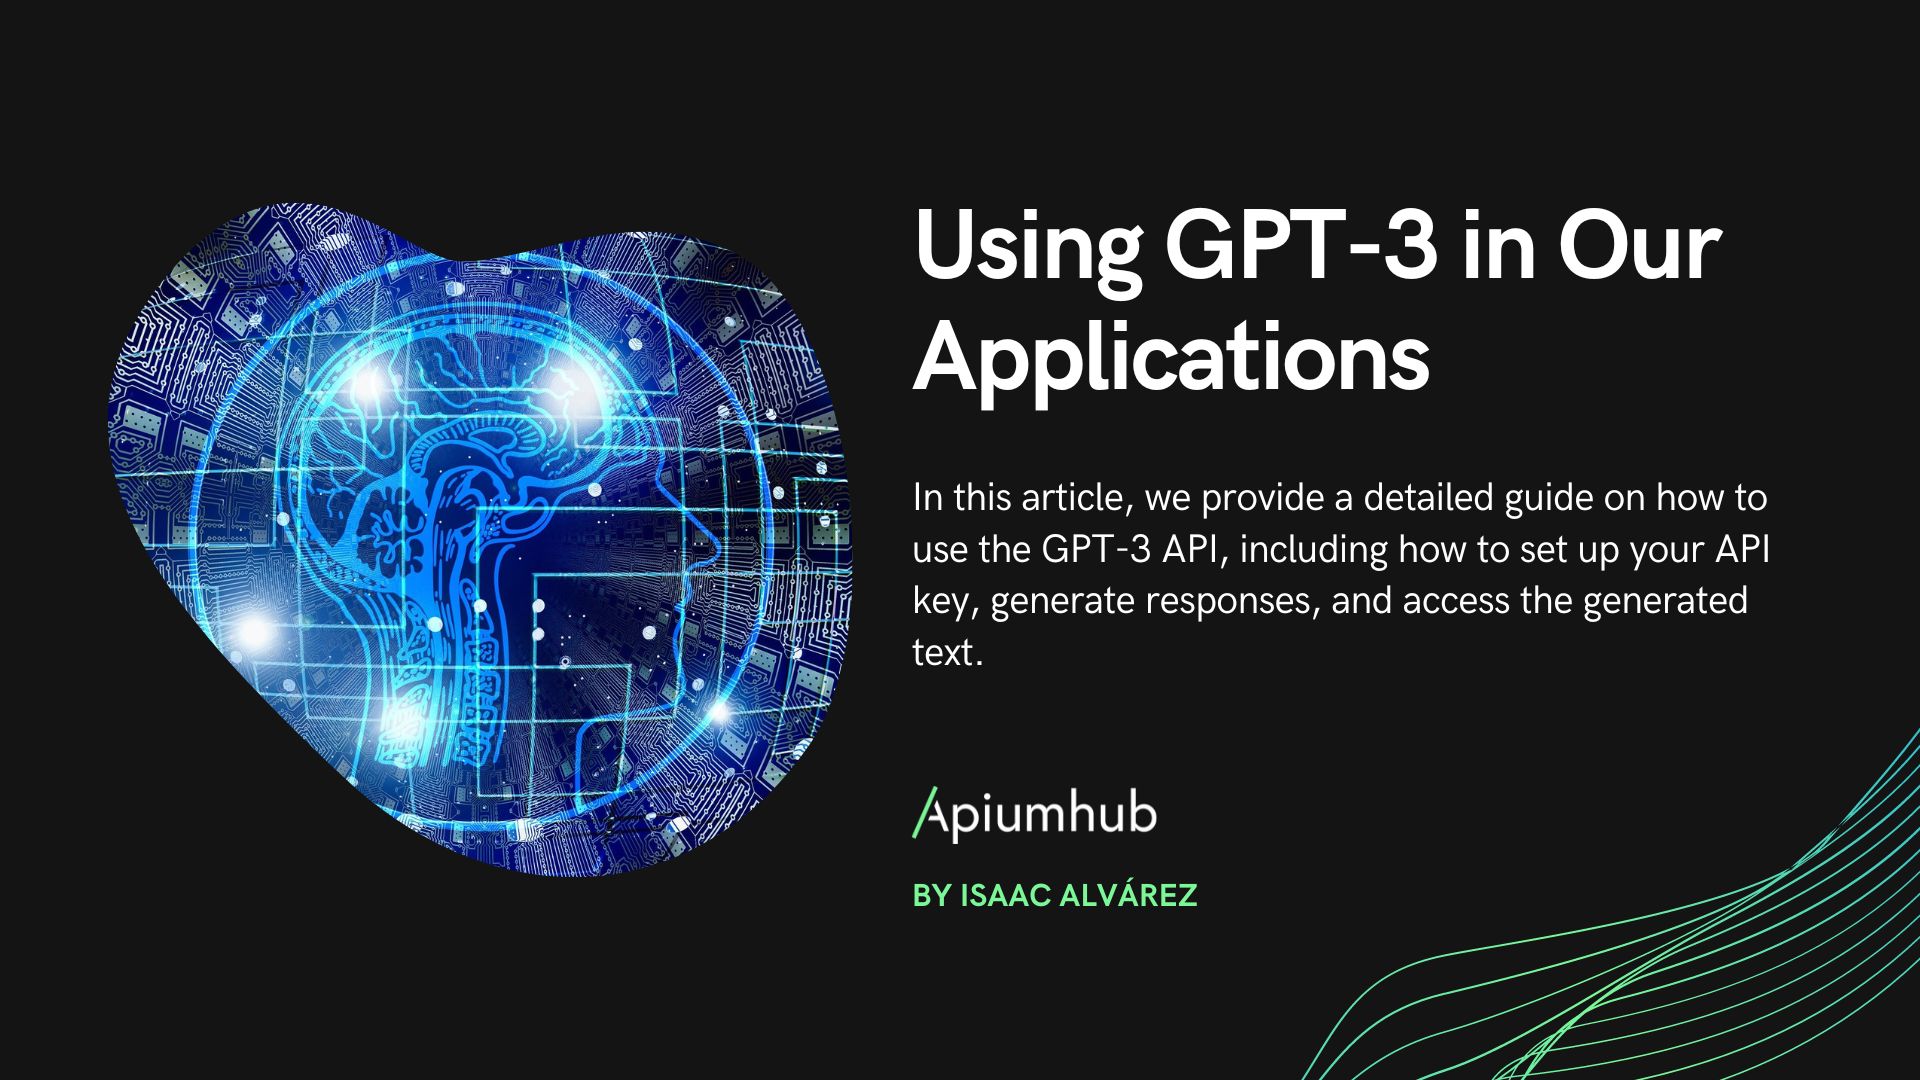 Using GPT-3 in our applications